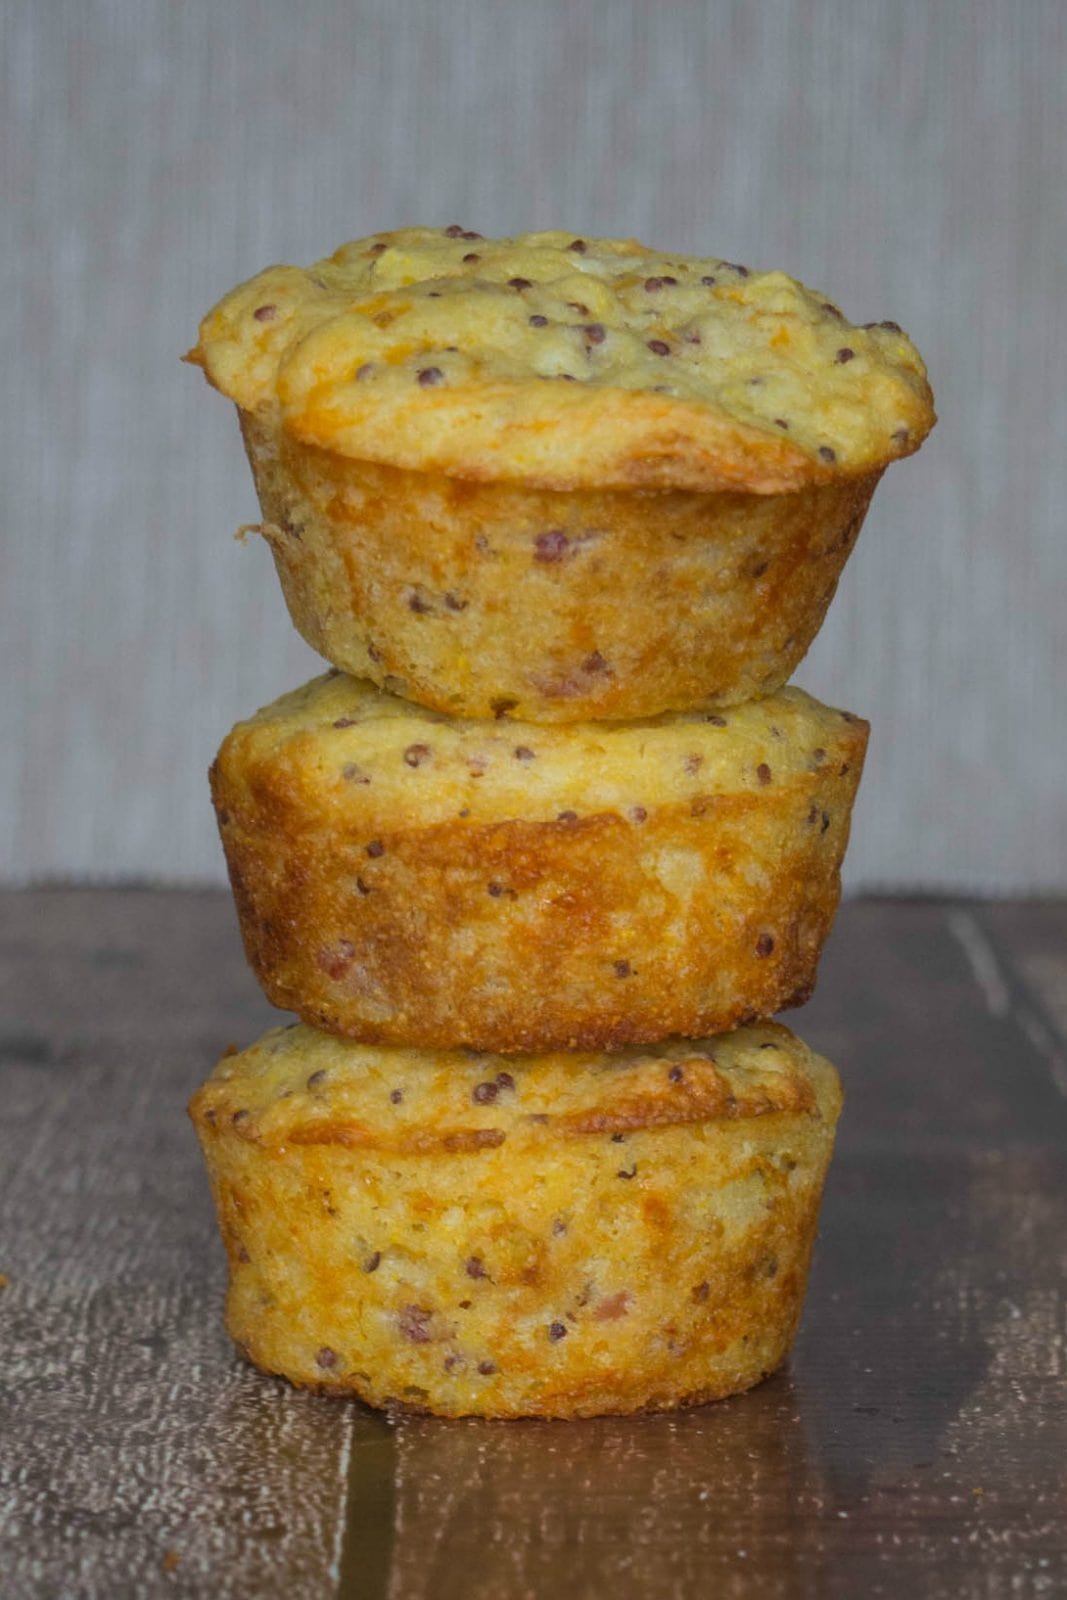 Three muffins stacked on top of each other.